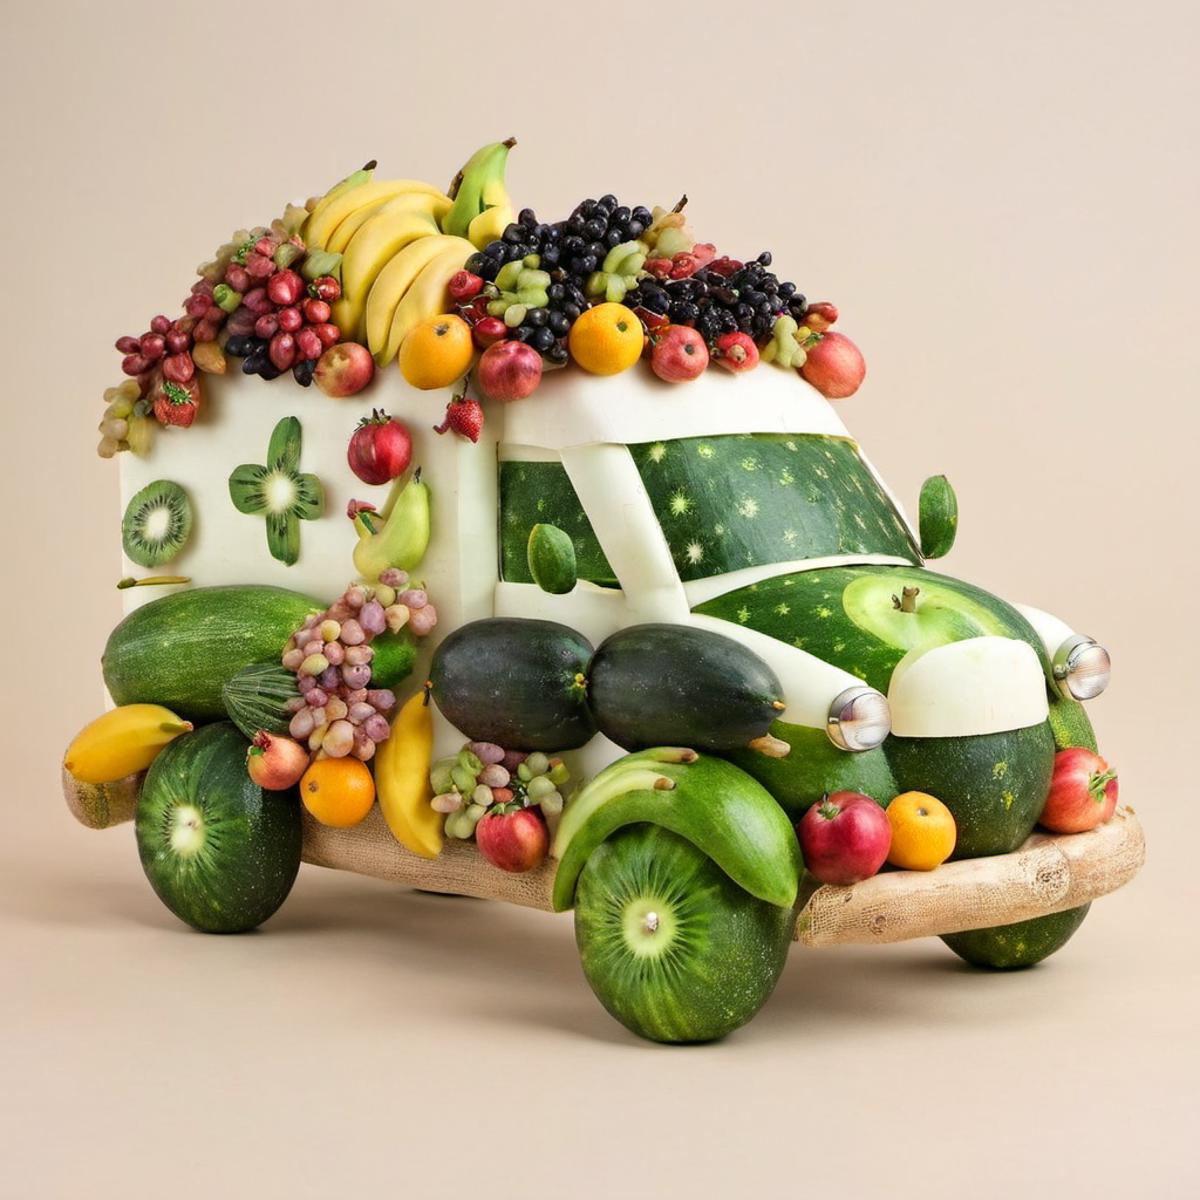 Made from fruits. SDXL image by superskirv